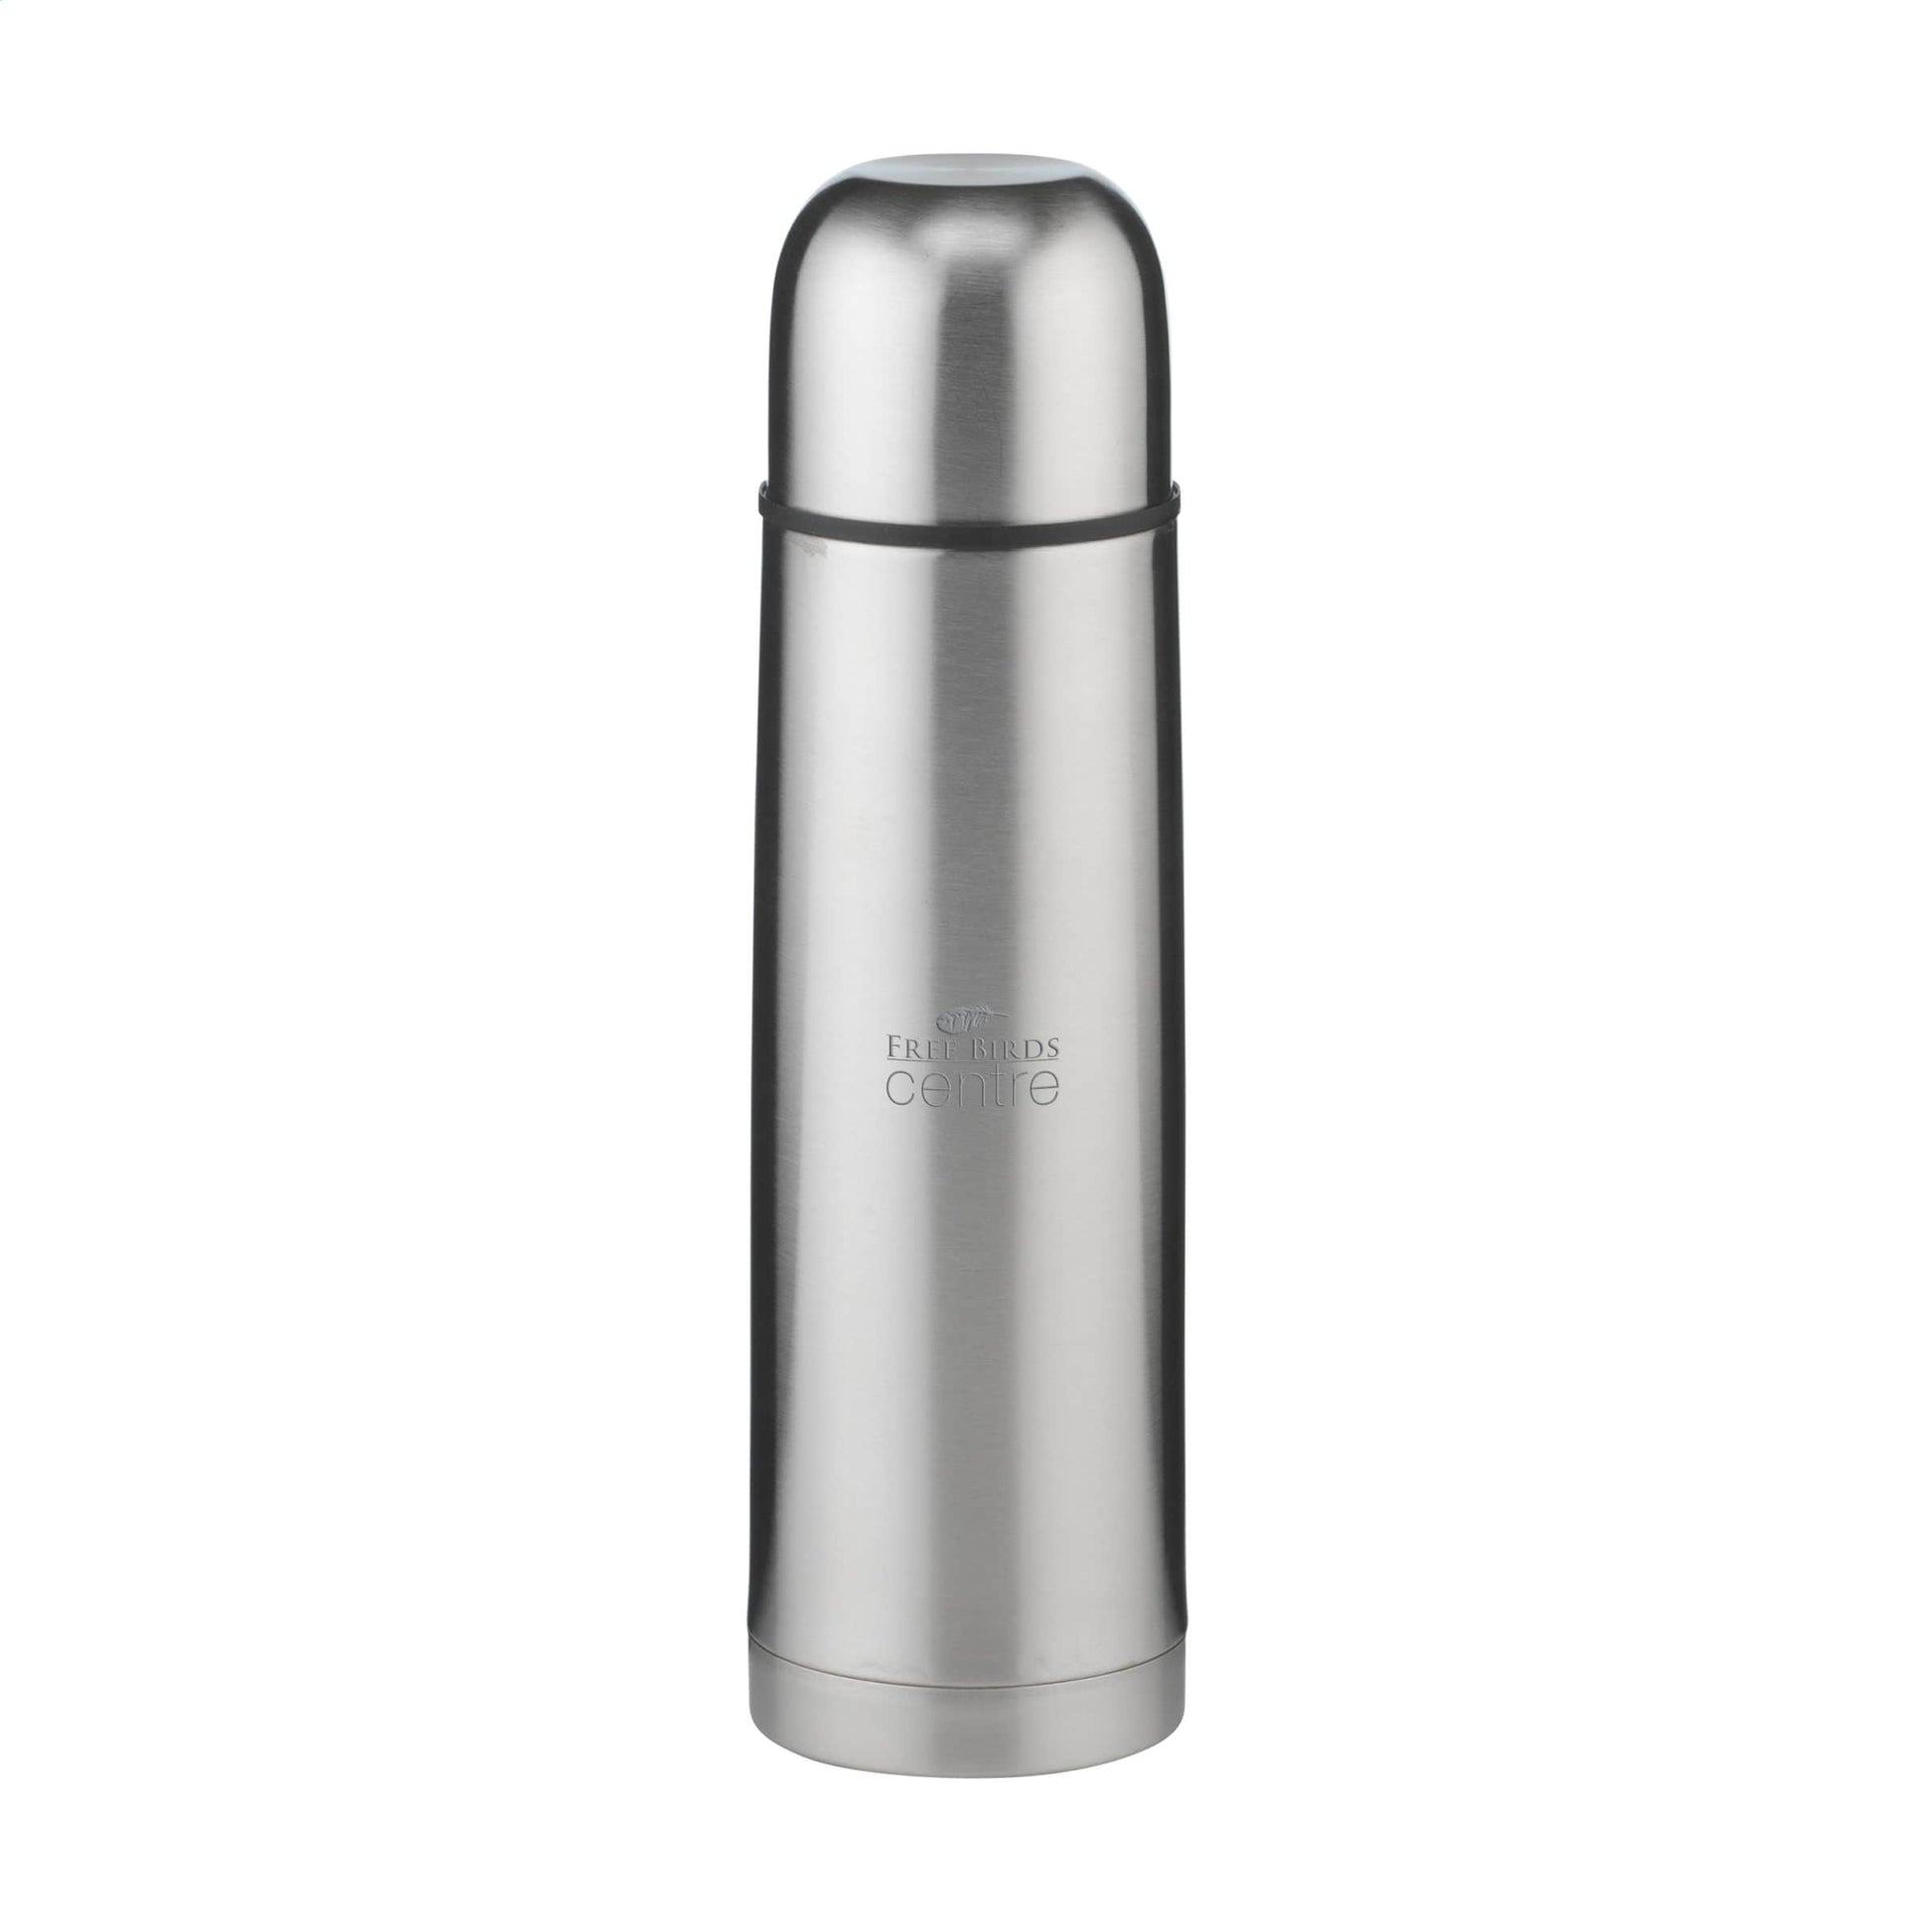 Thermotop 500 ml Thermoflasche - WERBE-WELT.SHOP